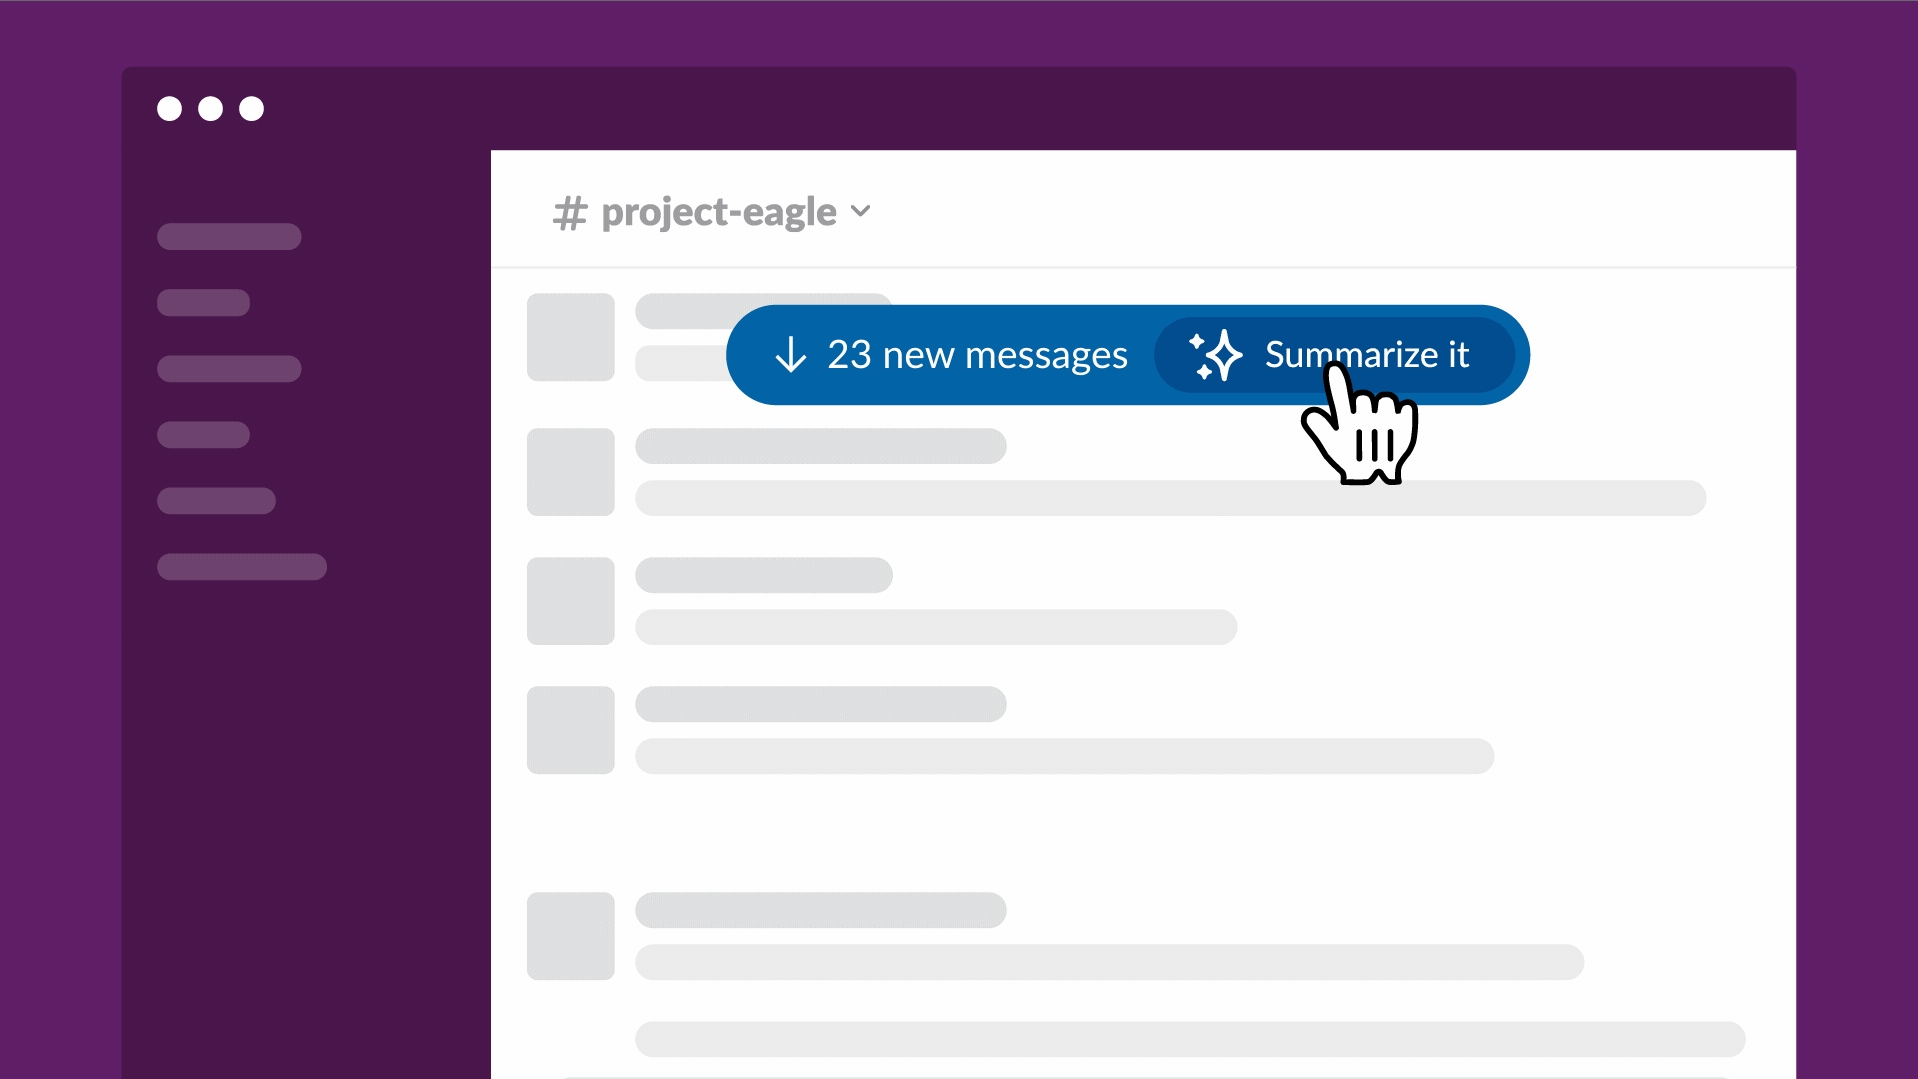 A mockup image of Slack's Slack GPT chatbot, showing a user beginning the process of summarizing a lengthy thread of messages.